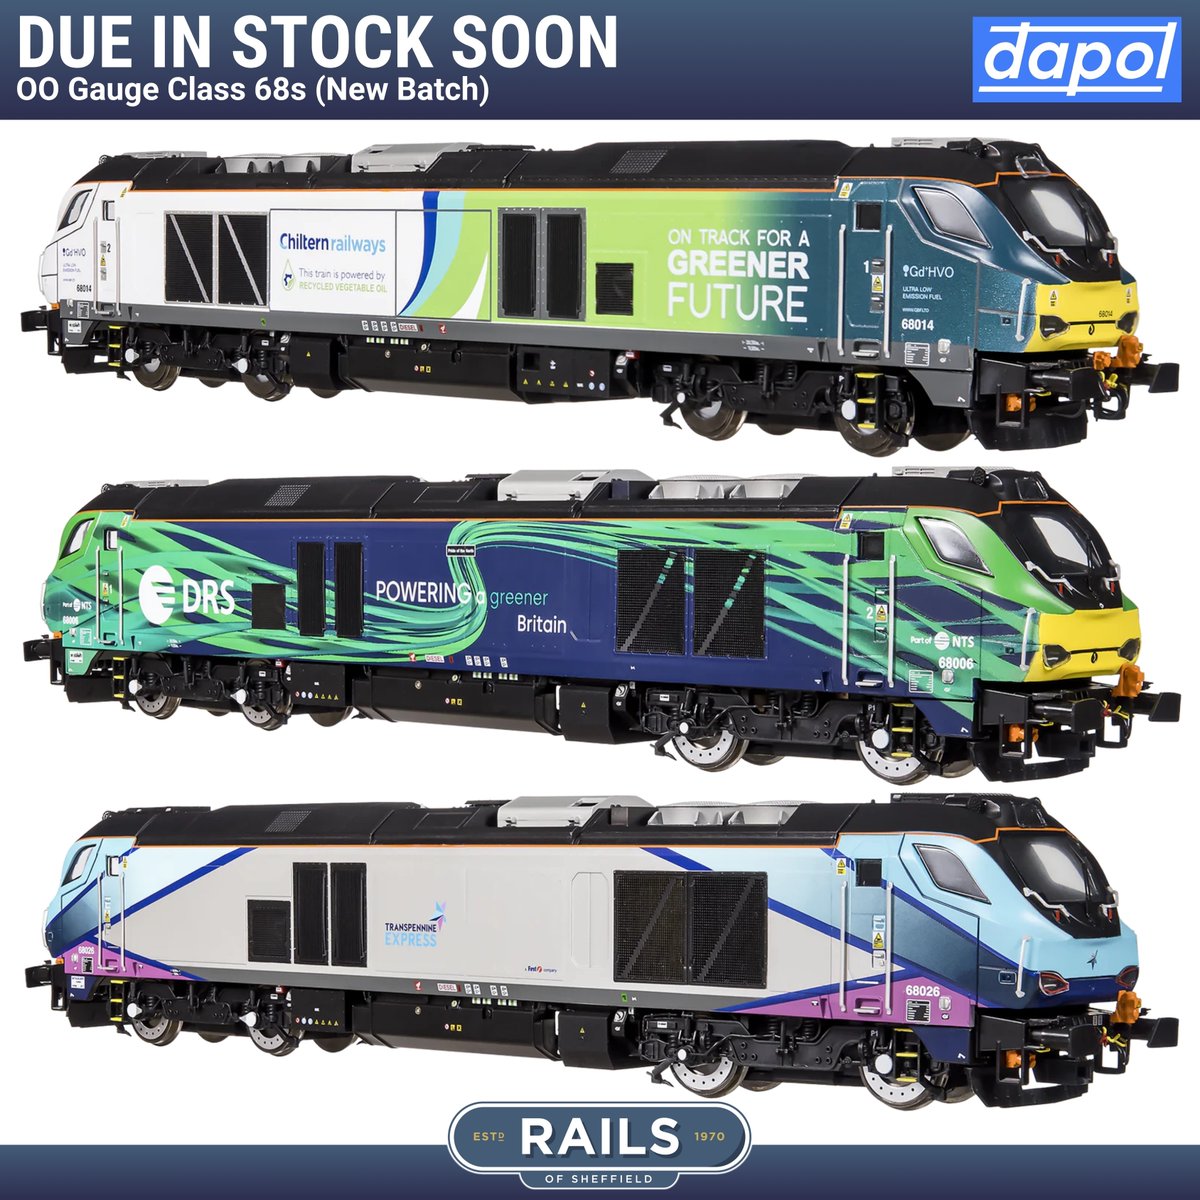 🚆 Dapol's next batch of OO gauge Class 68 locomotives  are due to arrive during June/ July 2024, including some new liveries not produced before! Pre-order yours from £153: tinyurl.com/ymfta32c